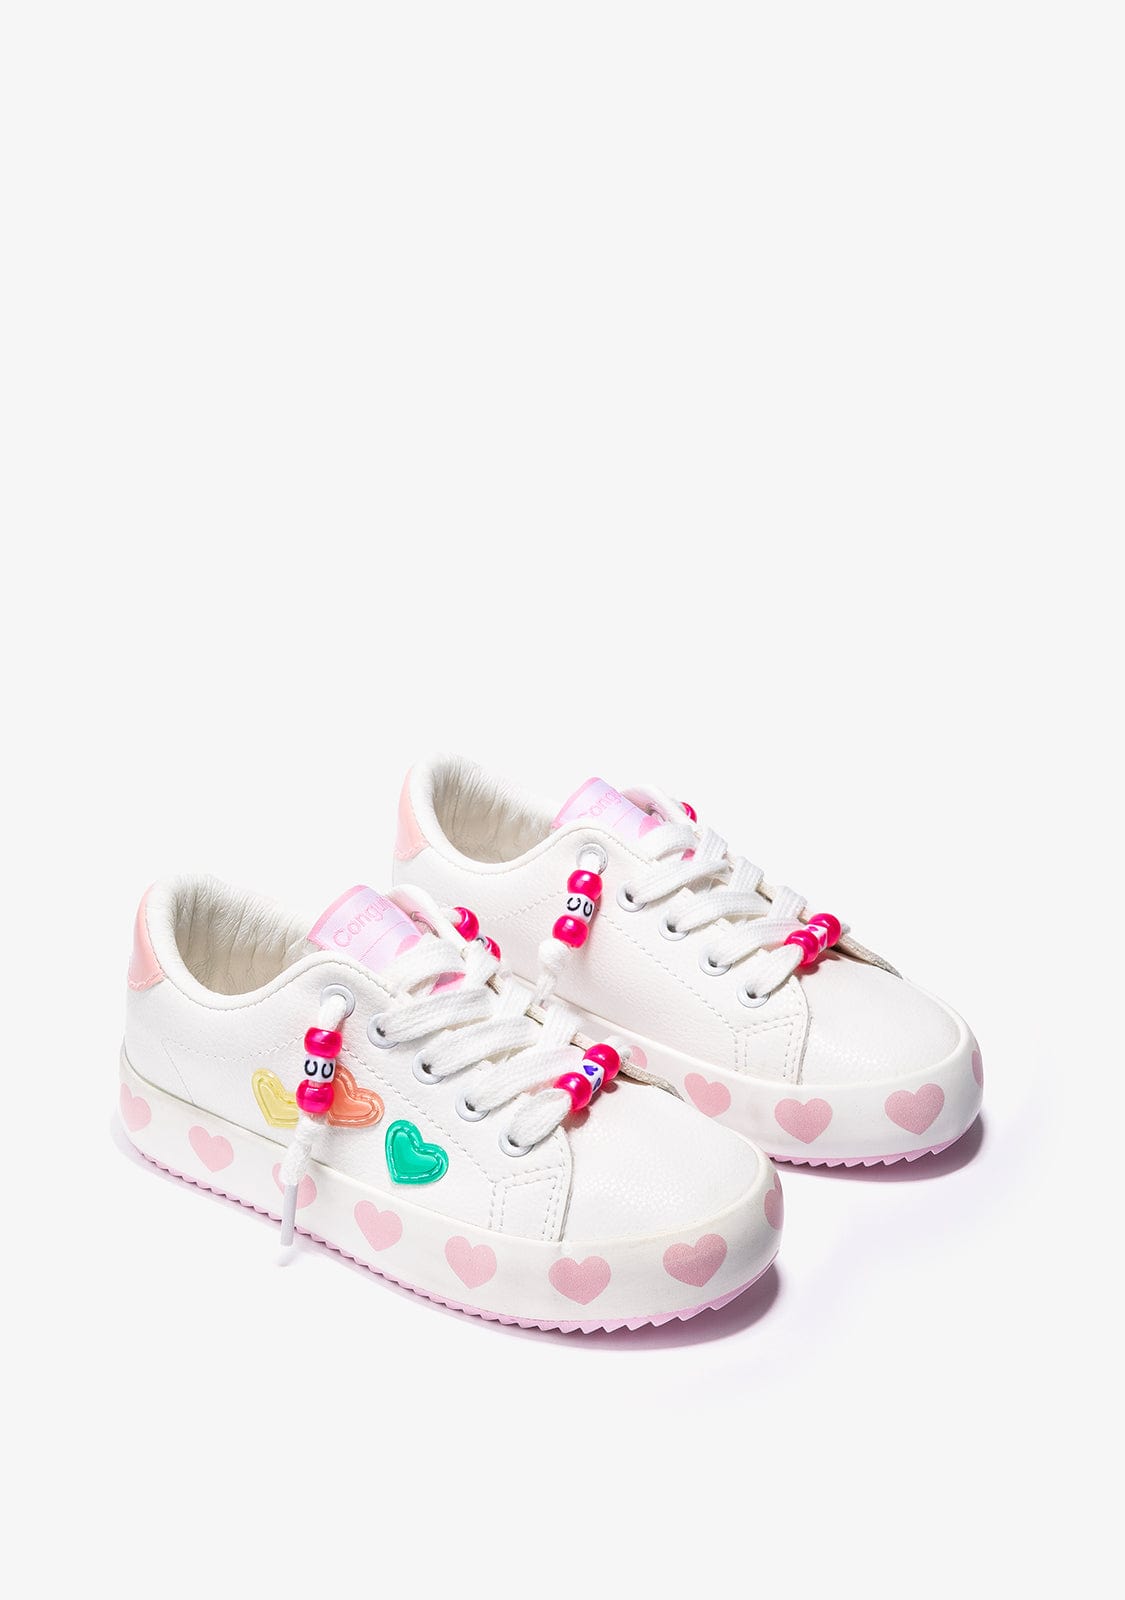 CONGUITOS Shoes Girl's White Heart Sneakers Napa